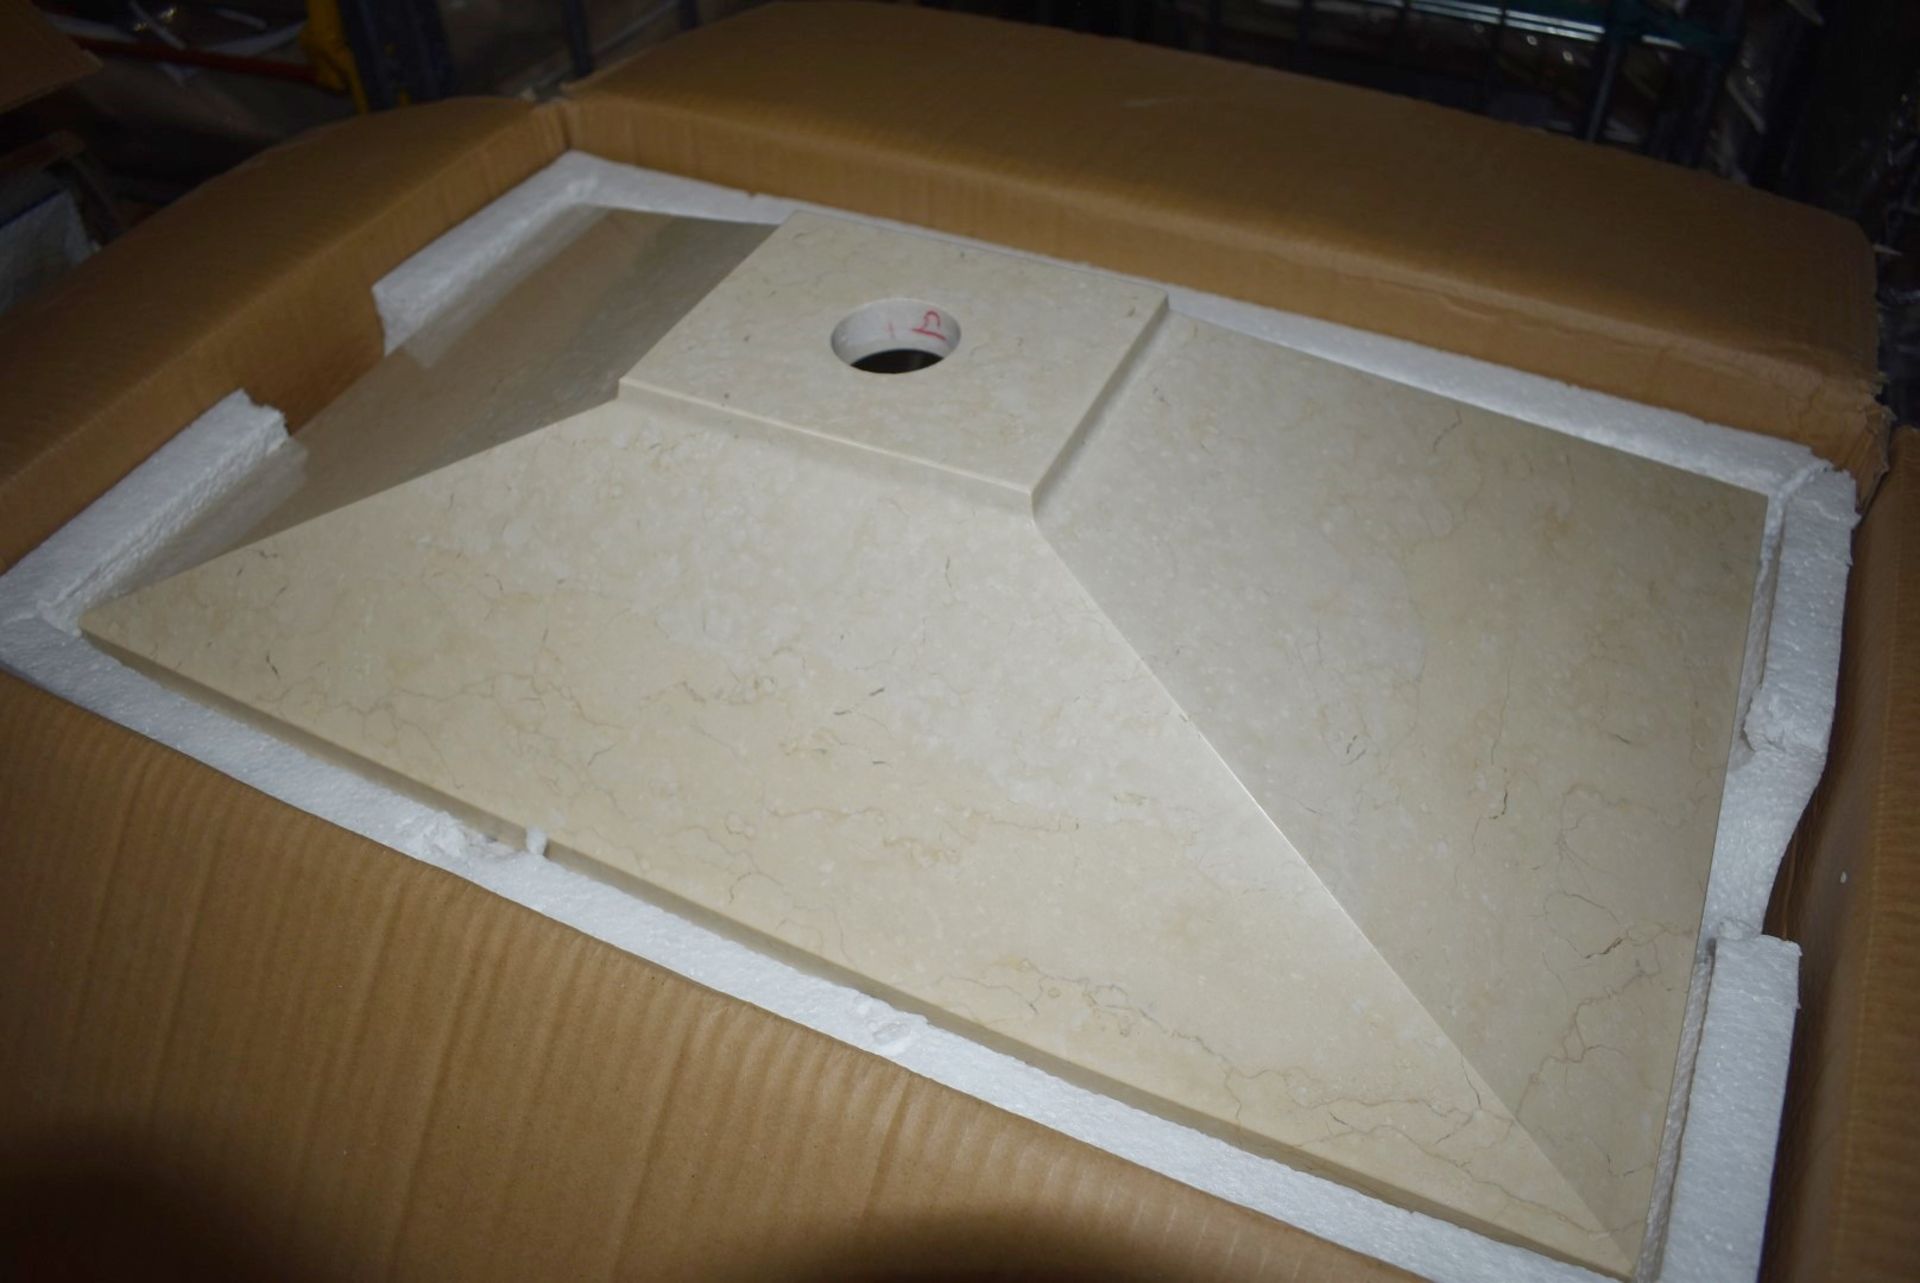 1 x Stonearth 'Karo' Solid Travertine Stone Countertop Sink Basin - New Boxed Stock - RRP £525 - Image 7 of 8